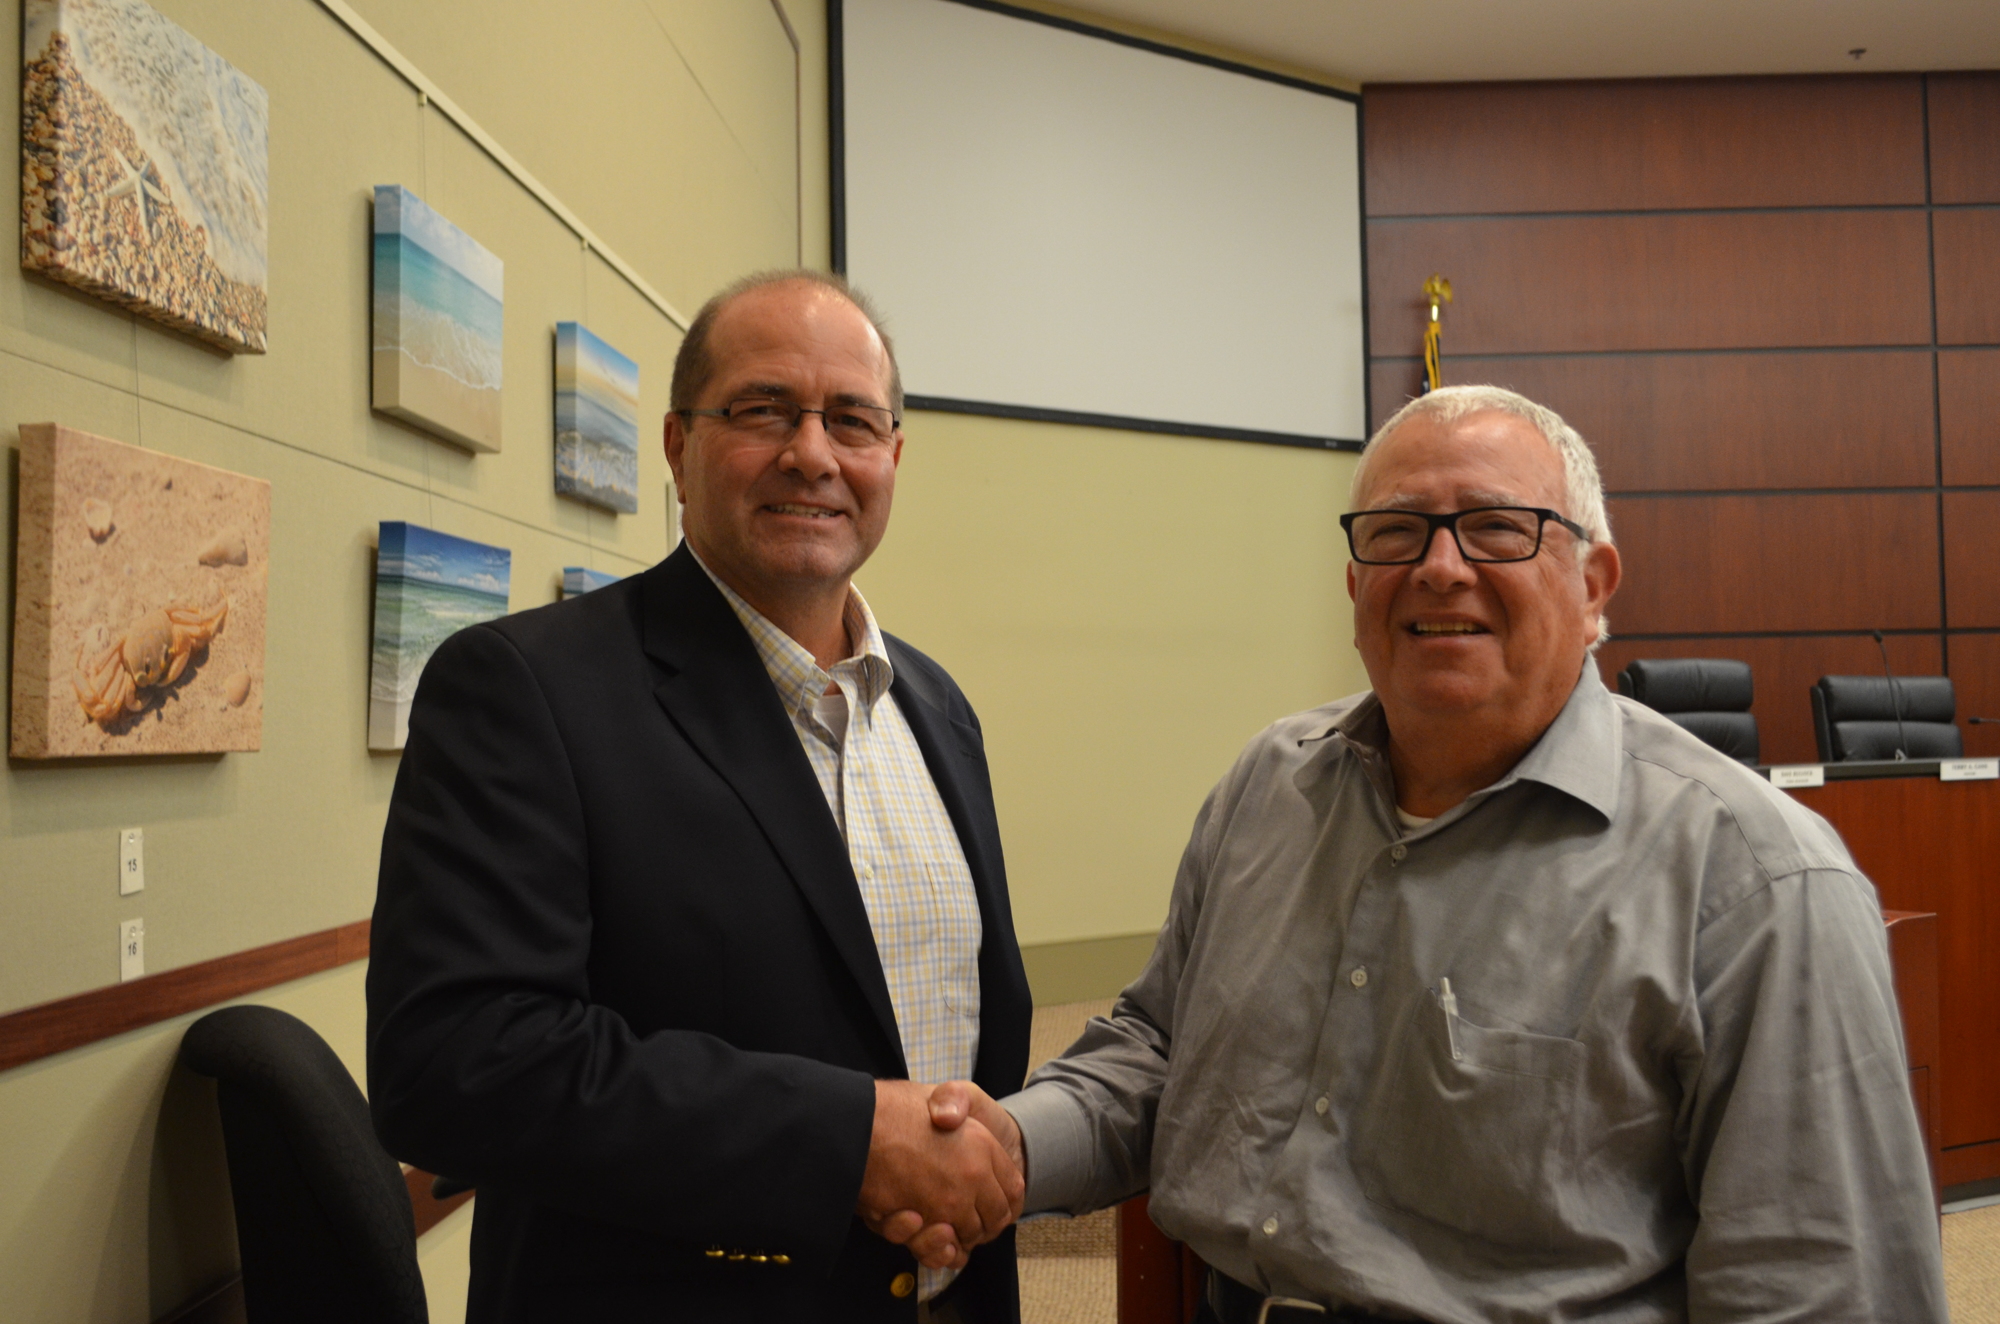 Mayor Terry Gans, left, said he feels new Town Manager Tom Harmer will hit the ground running.